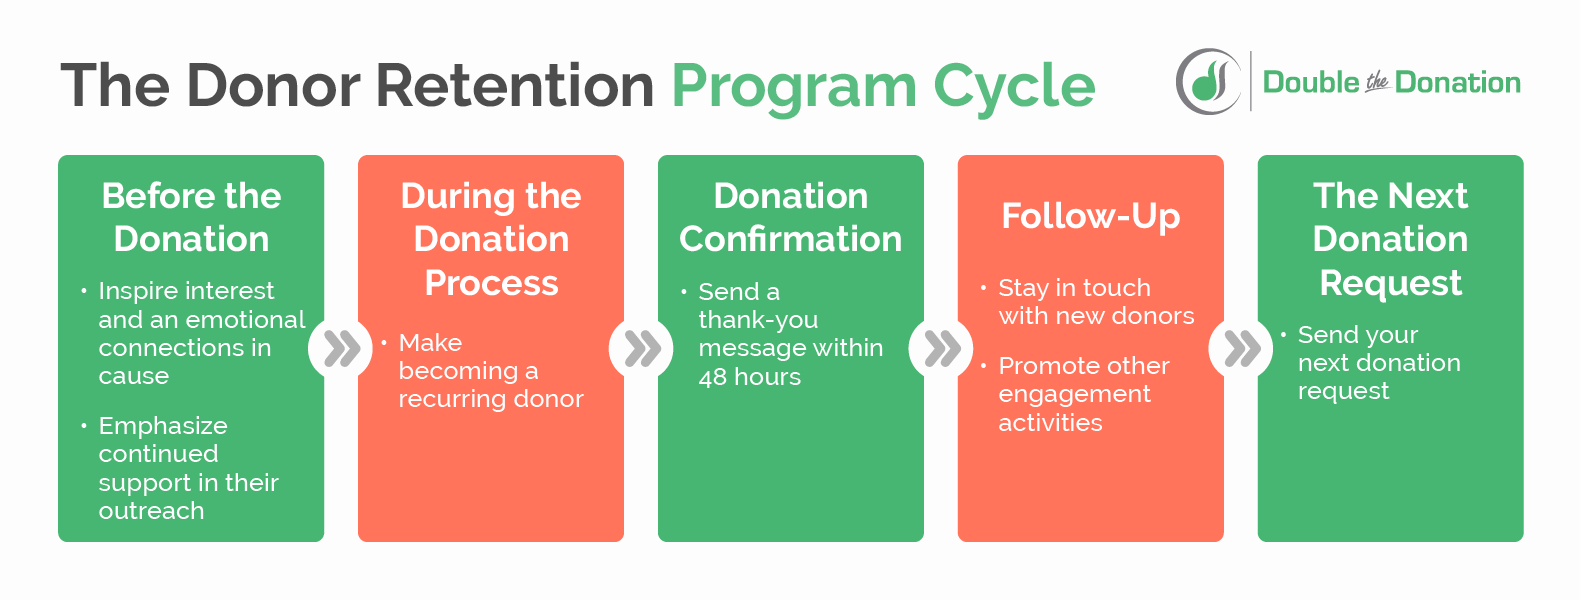 The graphic depicts the donor retention program cycle, written out below.